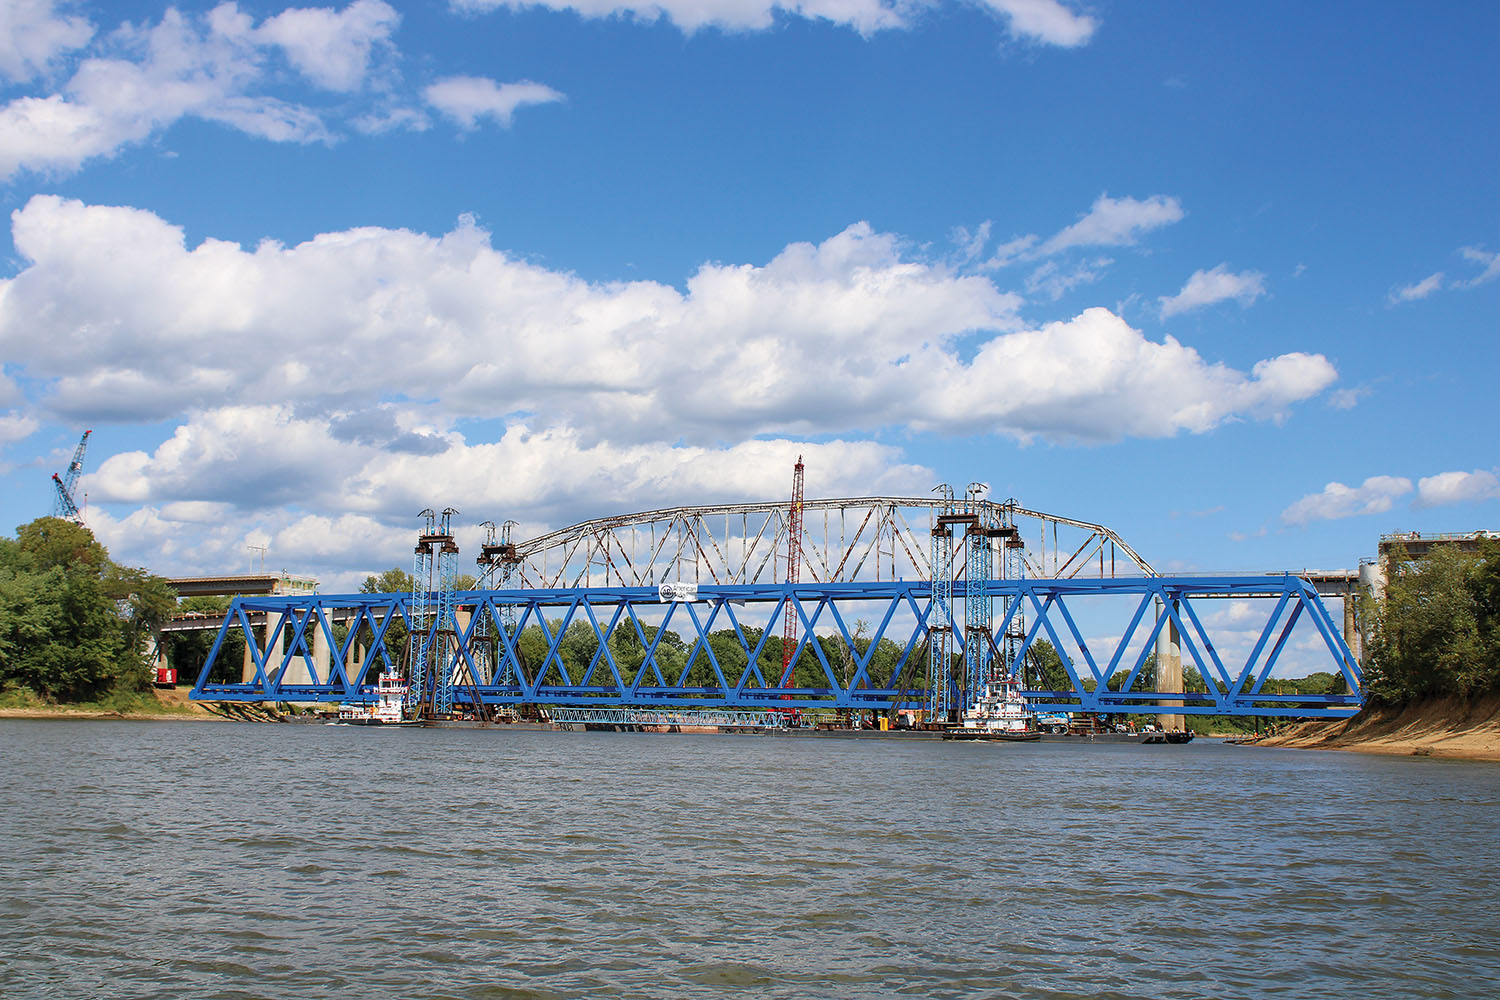 Excell Marine towboats took the 700-foot steel truss that is the main span for the new Cumberland River bridge at Smithland down the Tennessee River from Paducah, then up the Ohio River to the Cumberland River at Smithland. It was floated on four jumbo barges. (Photo by Shelley Byrne)